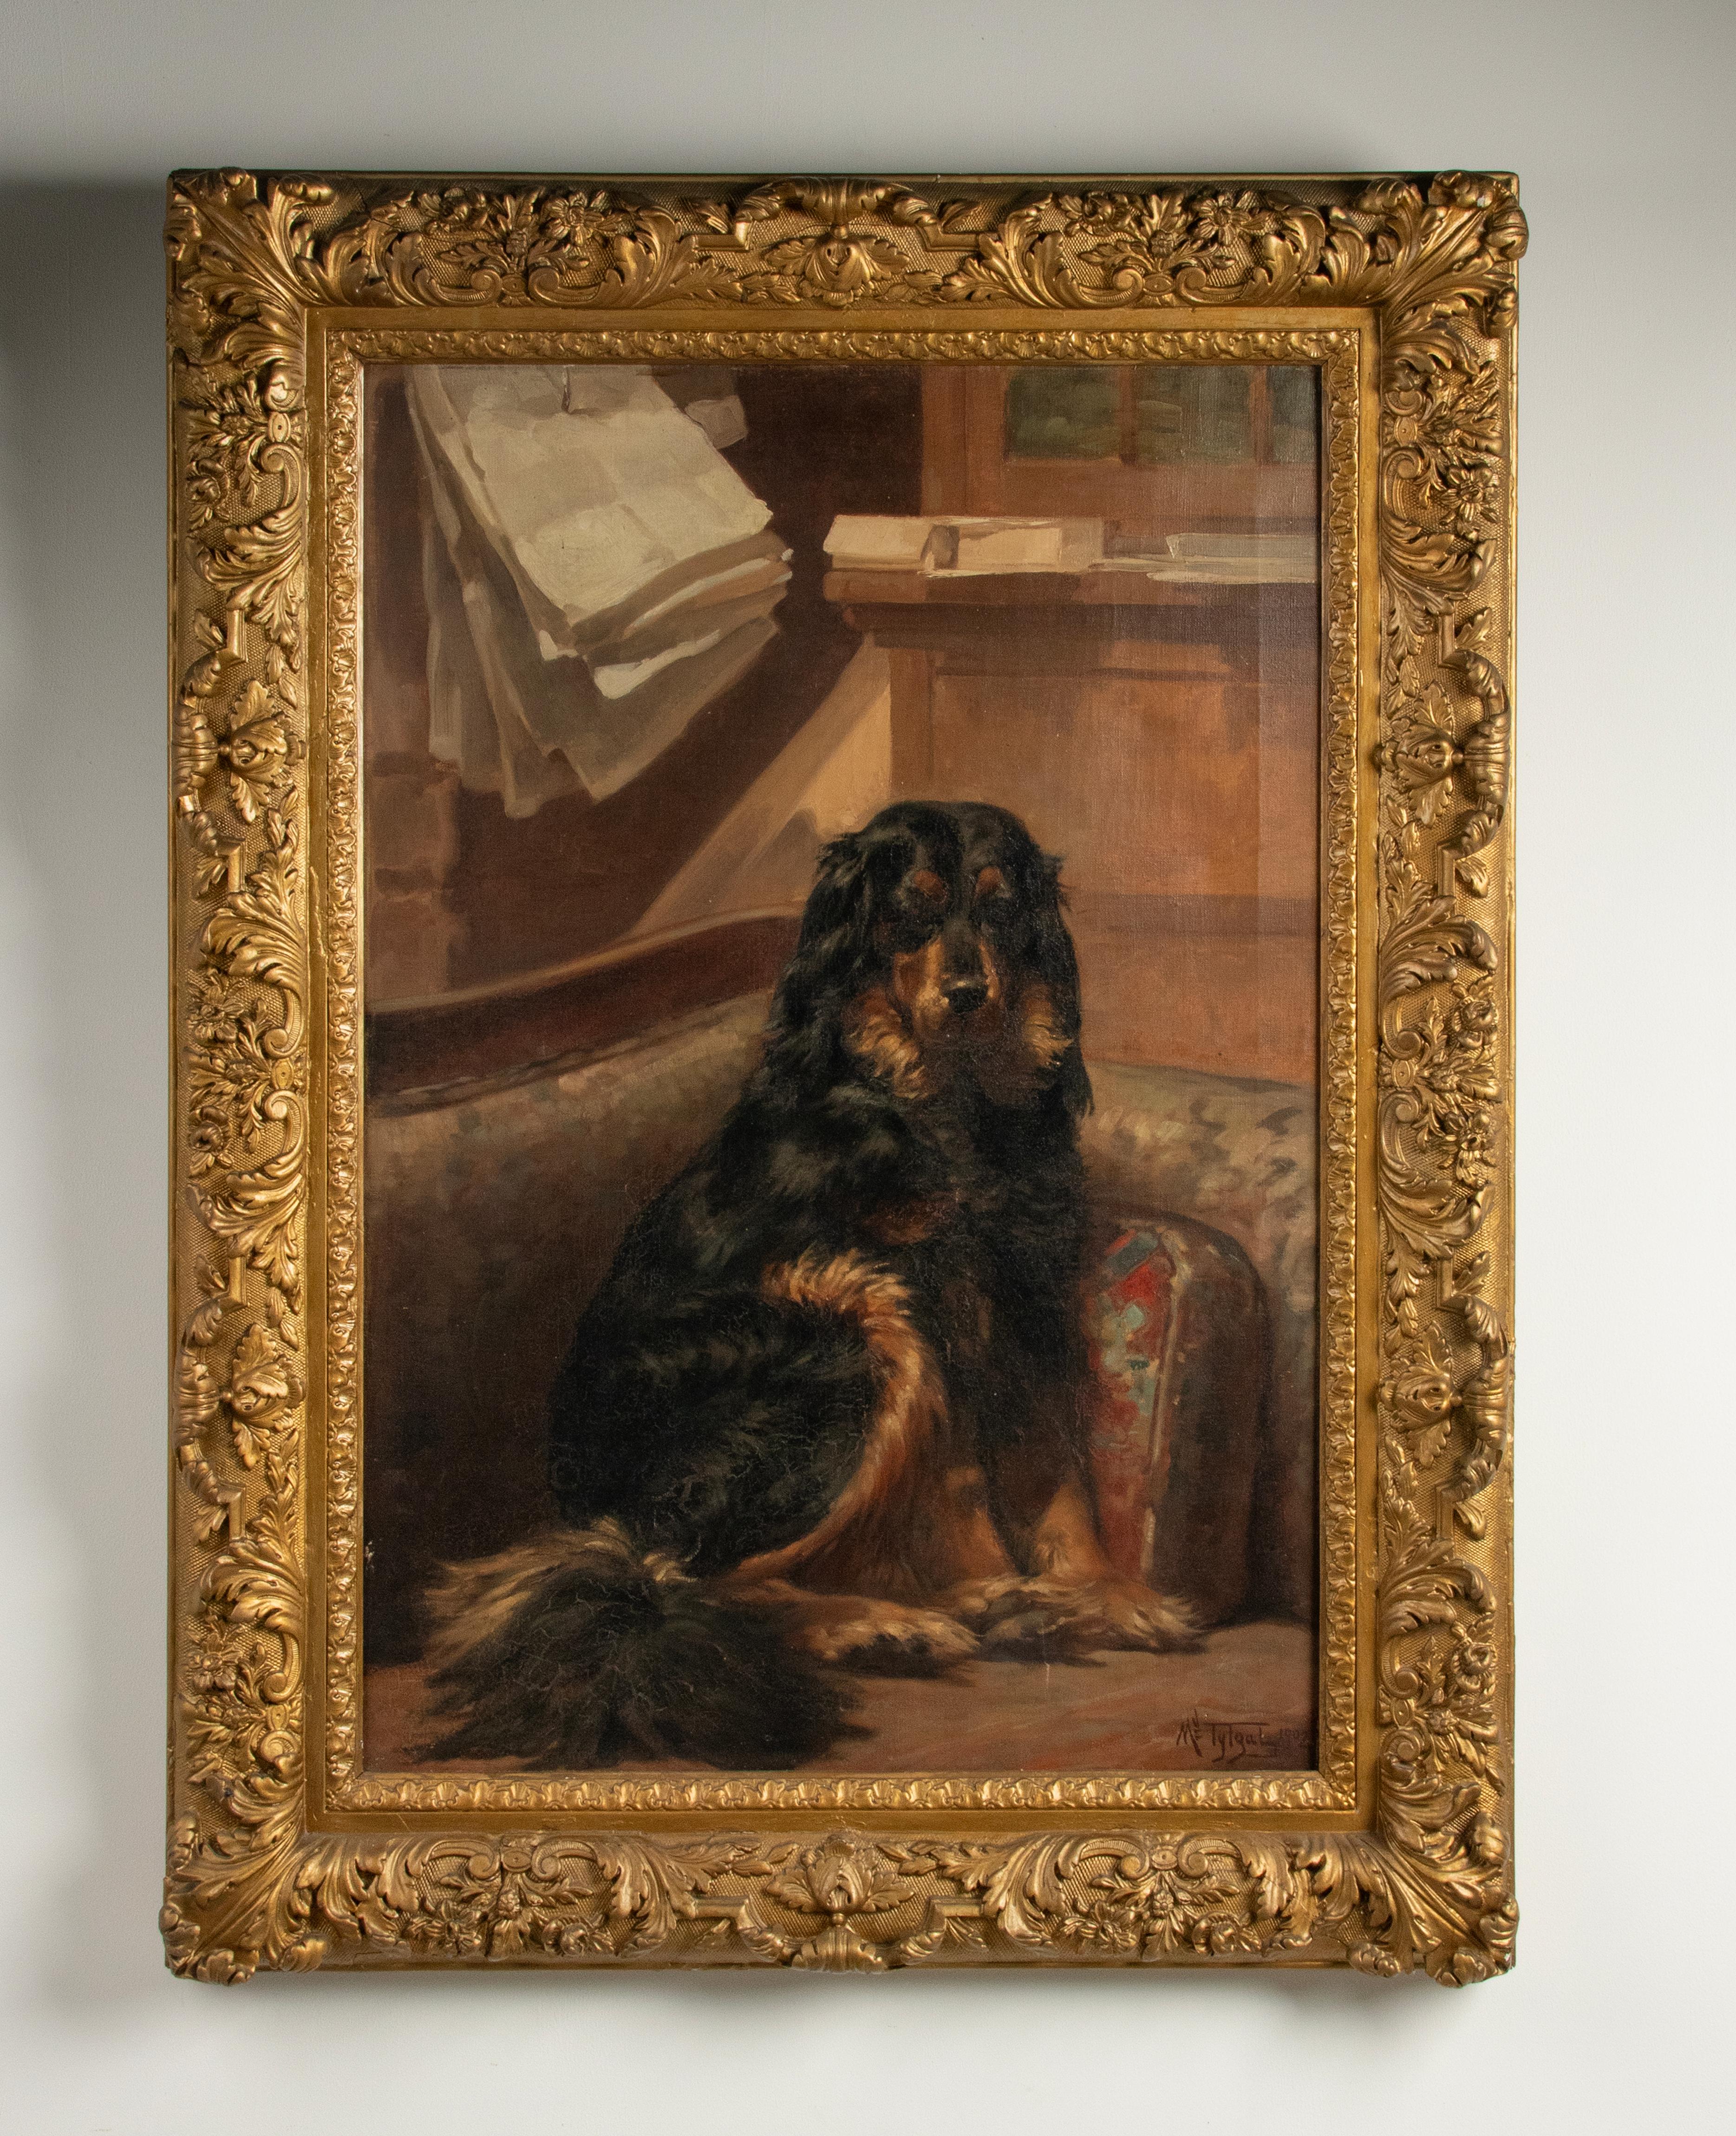 A beautiful antique dog portrait of a Gordon Setter.
The painting is dated 1902 and signed by Médard Tytgat.
It is a beautiful scene, the dog poses in a calm and friendly way, in a homely setting. The dog has a beautiful expression on its face, the